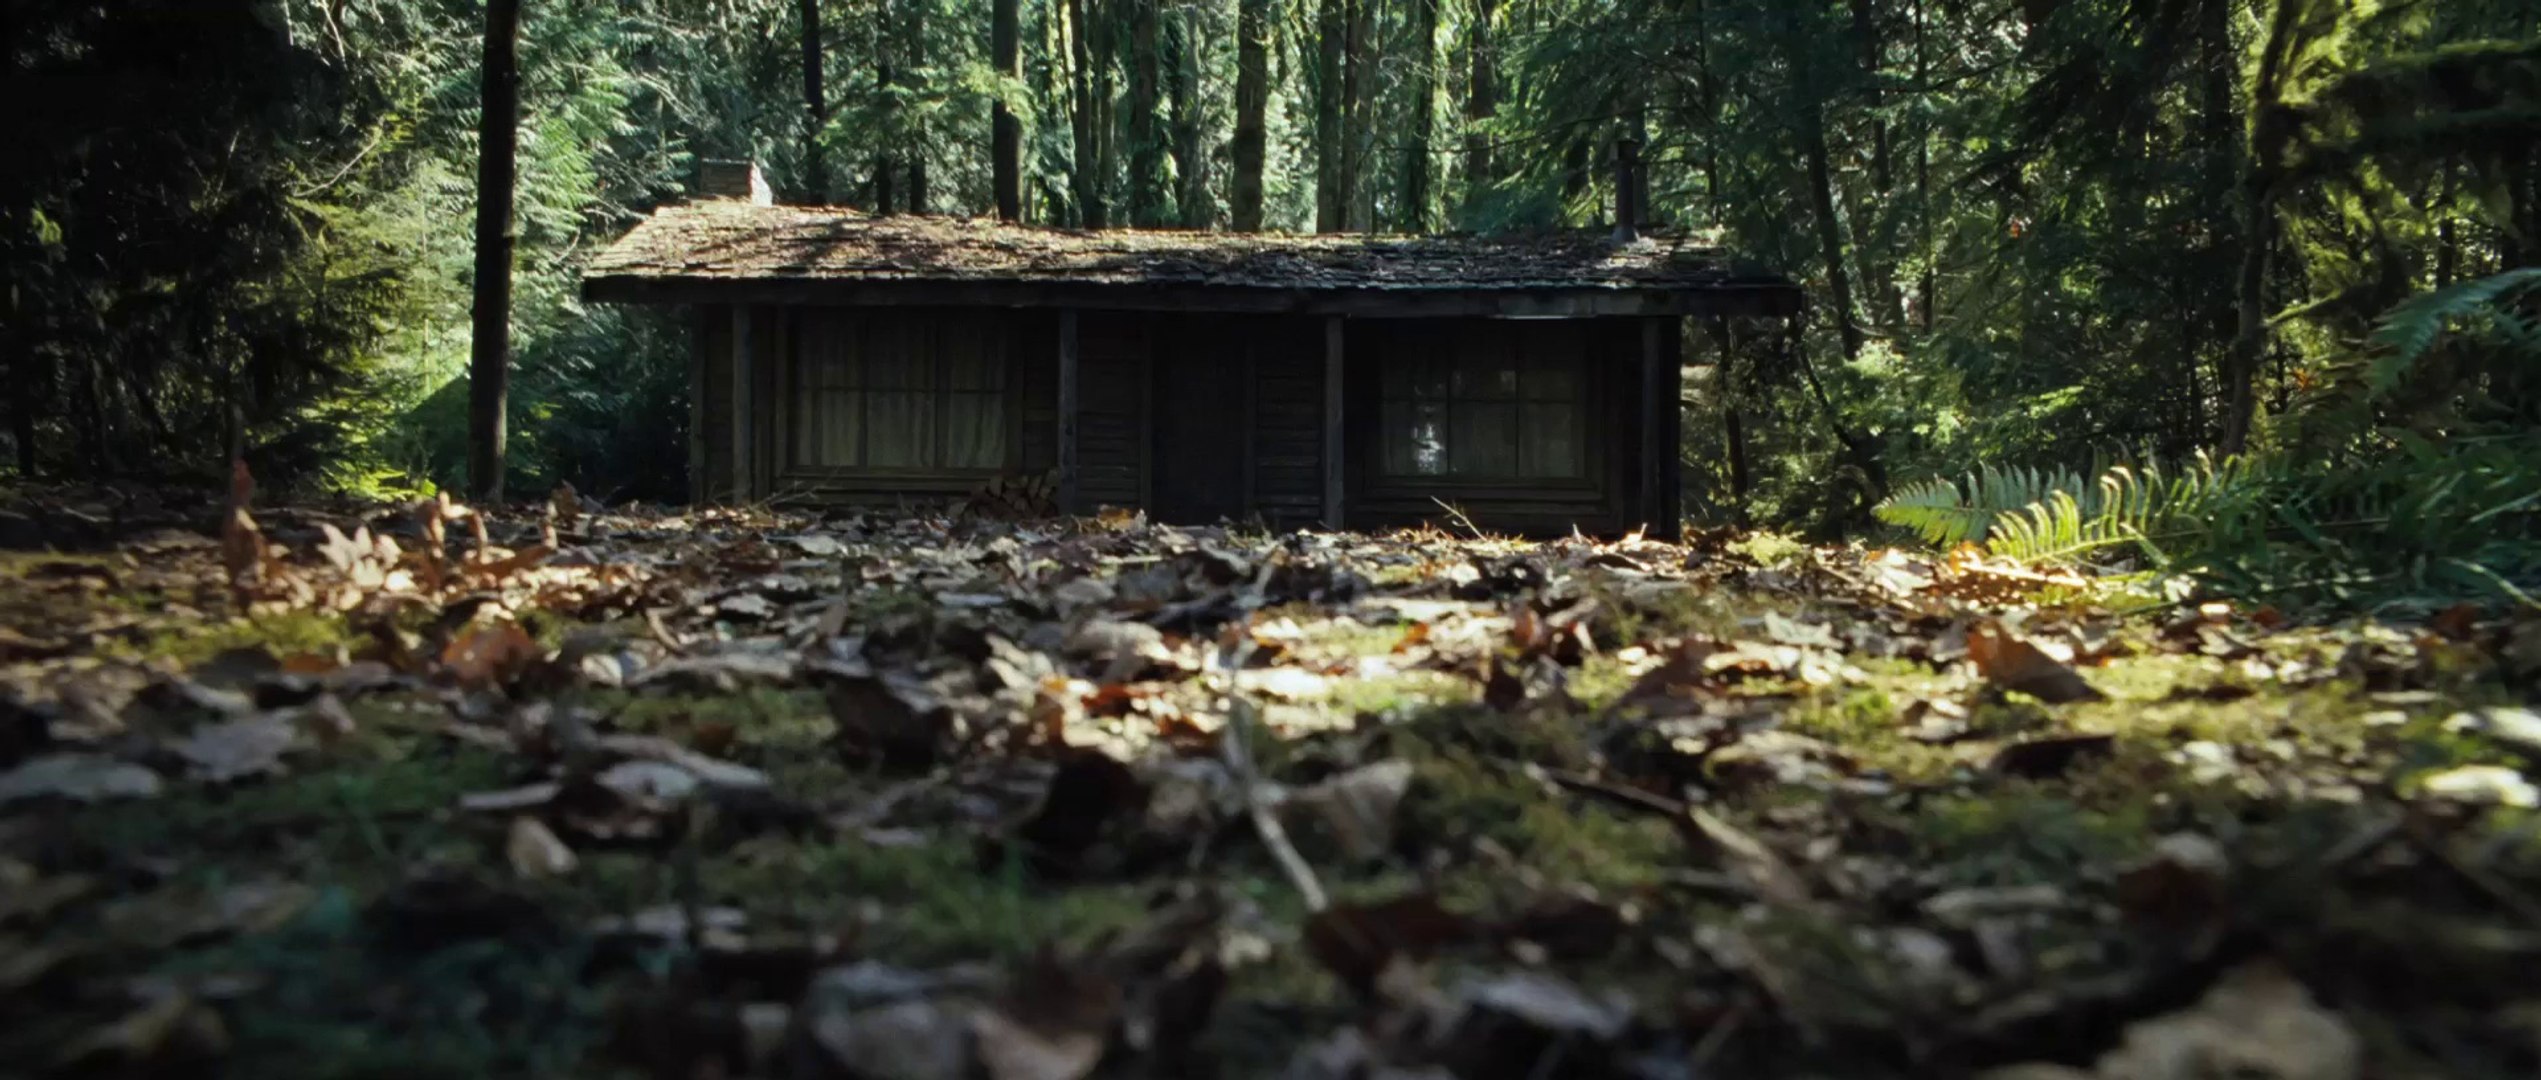 Cabin in the woods: Trailer HD - Vidéo Dailymotion